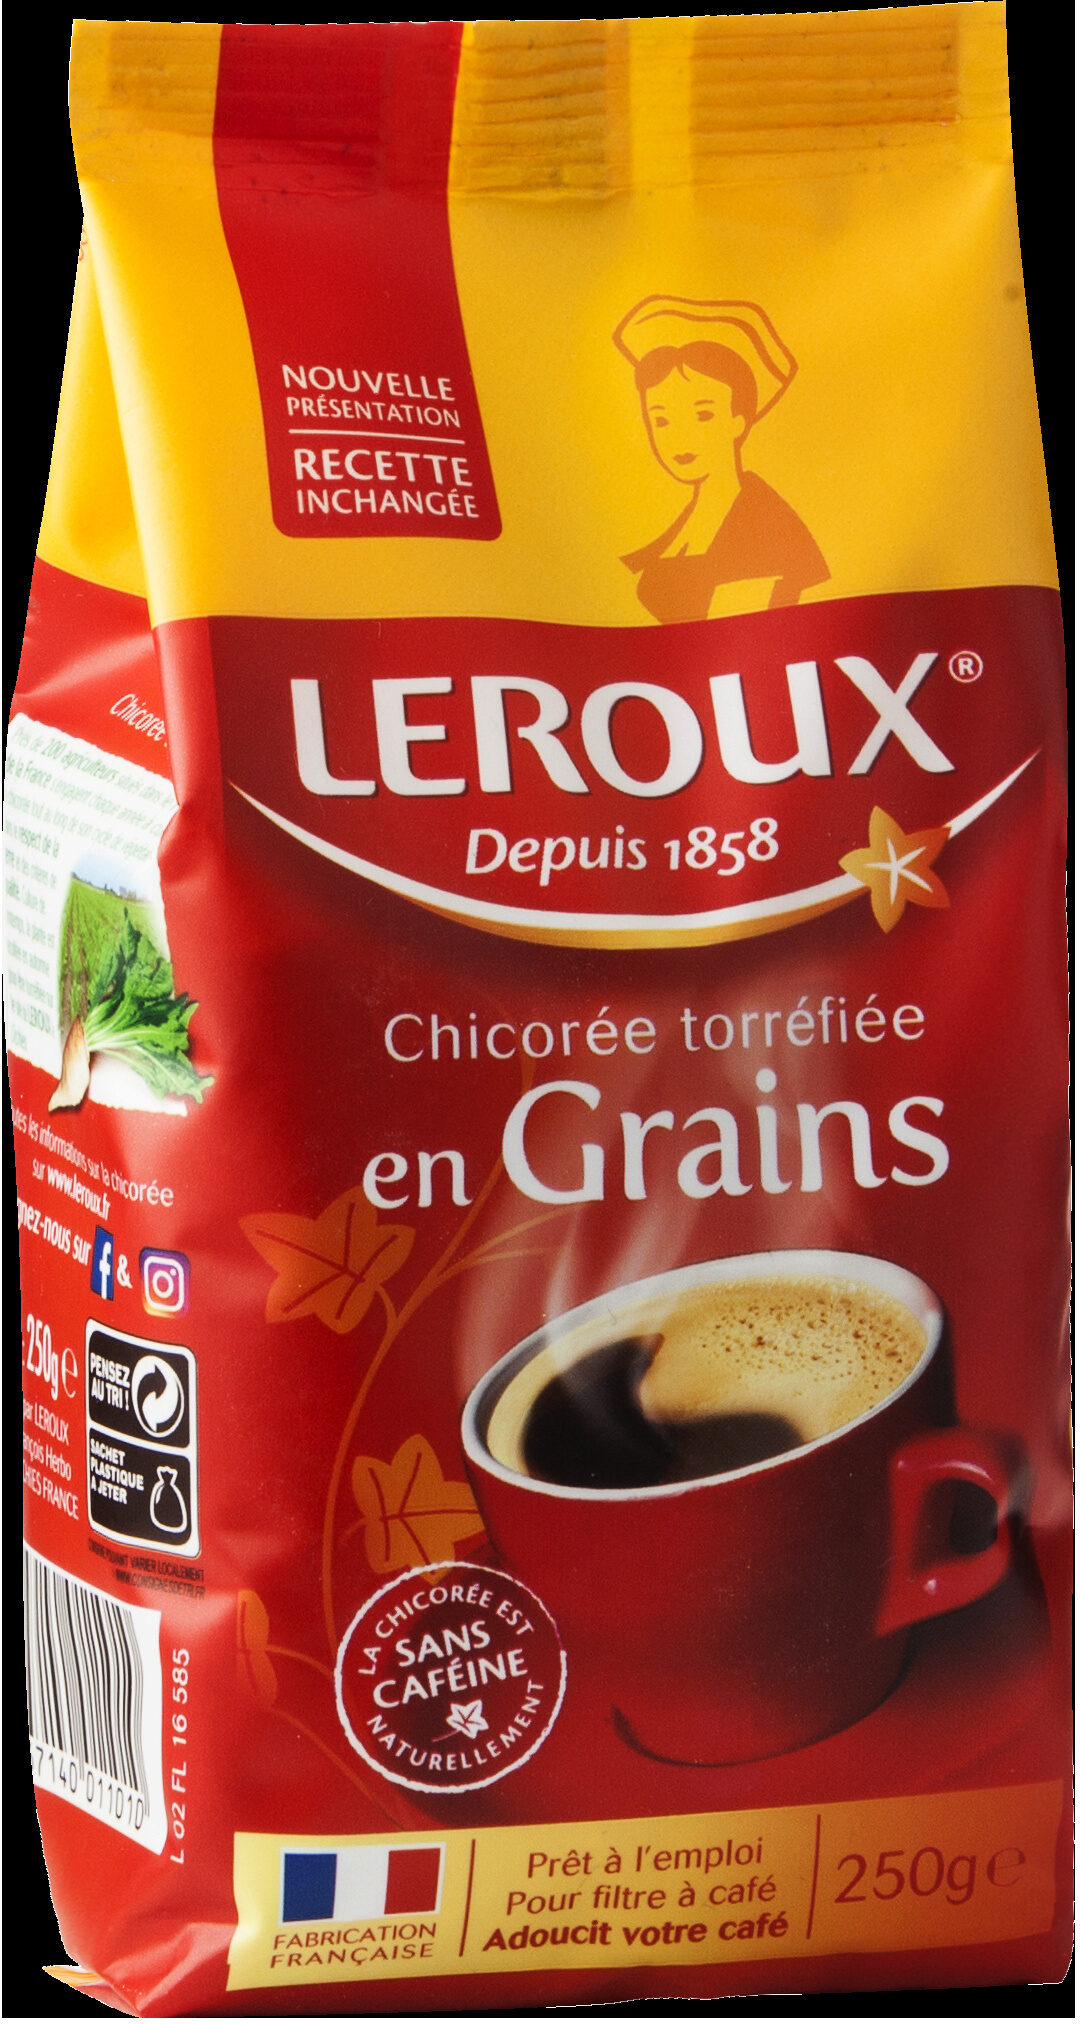 Chicoree grains 250g - Product - fr